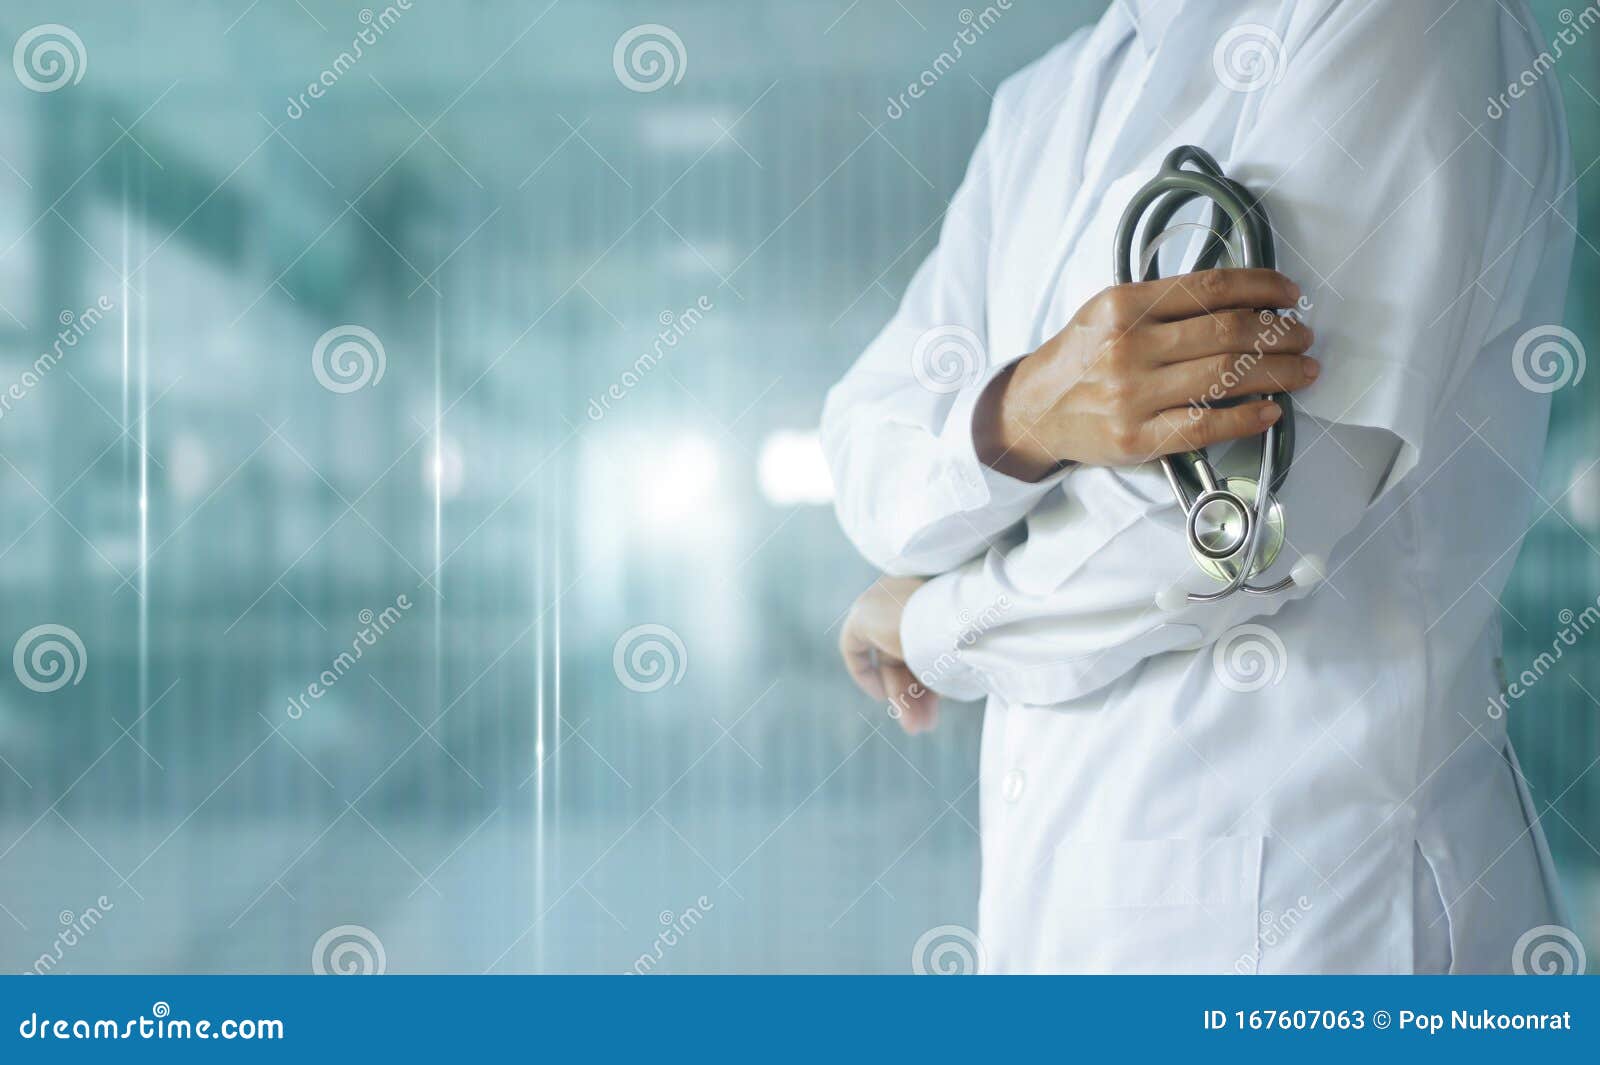 Medicine Doctor with Stethoscope in Hand on Hospital Background, Medical  Technology, Healthcare and Medical Concept Stock Image - Image of  diagnostic, health: 167607063